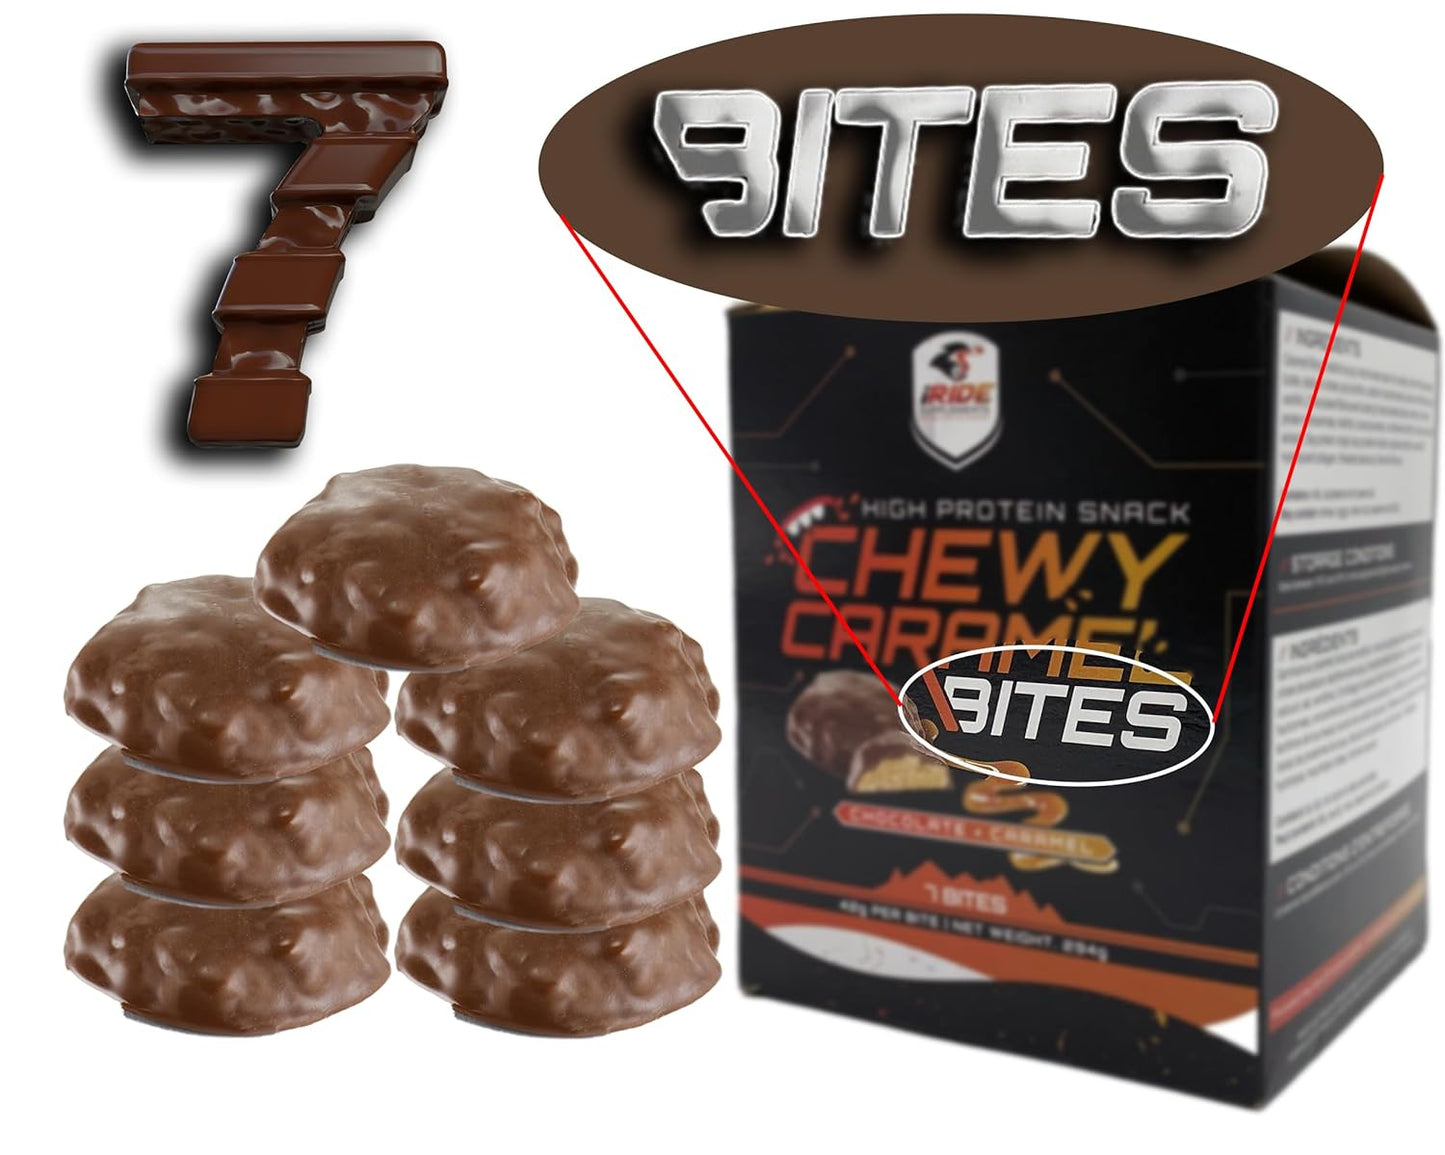 iRide Supplements - High Energy High Protein Chocolate Caramel Bites with Low Sugar - Chewy cookies - The Perfect Balanced Snacks Delicious High Protein Diets - 42g (7 Pack)